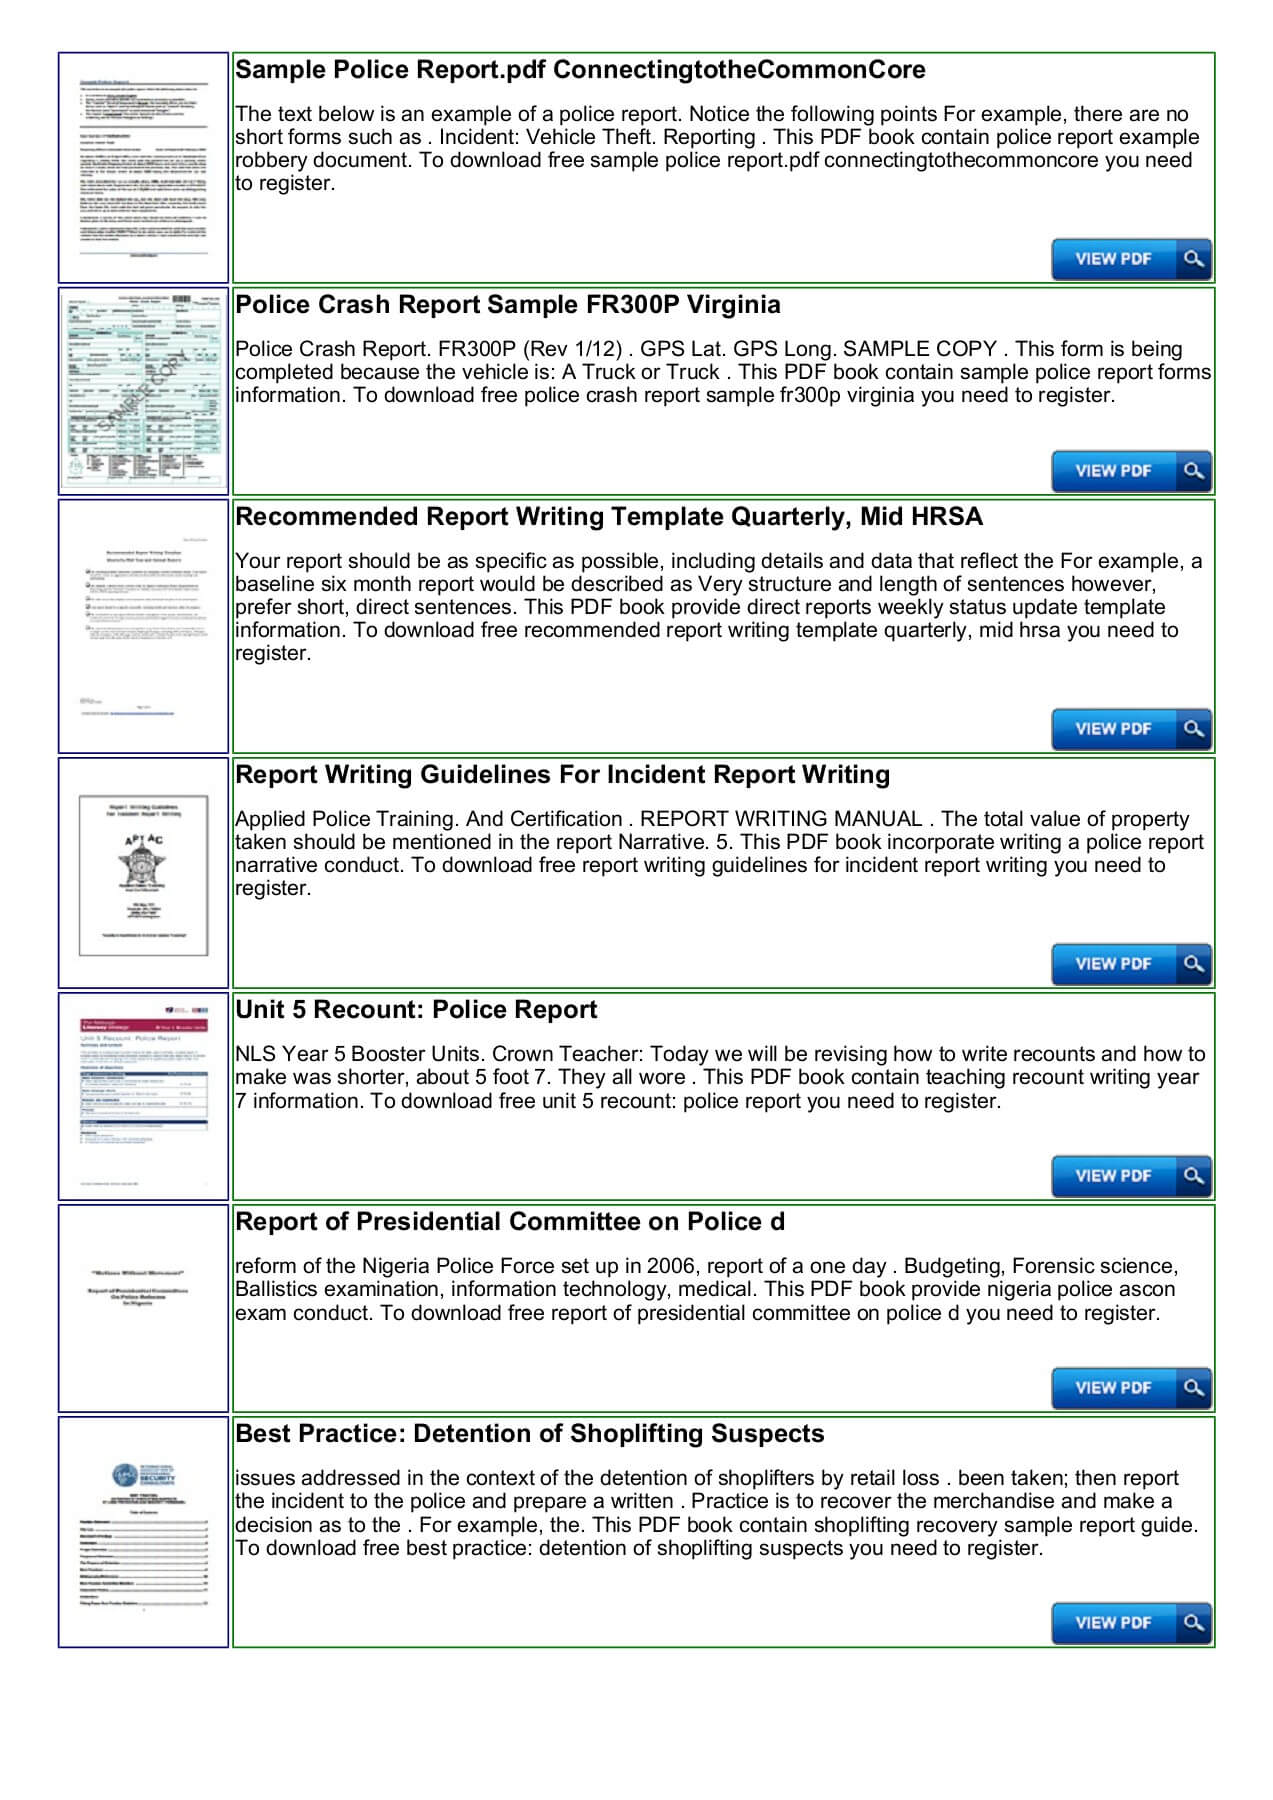 Police Shoplifting Report Writing Template Sample Pages 1 Inside Police Report Template Pdf